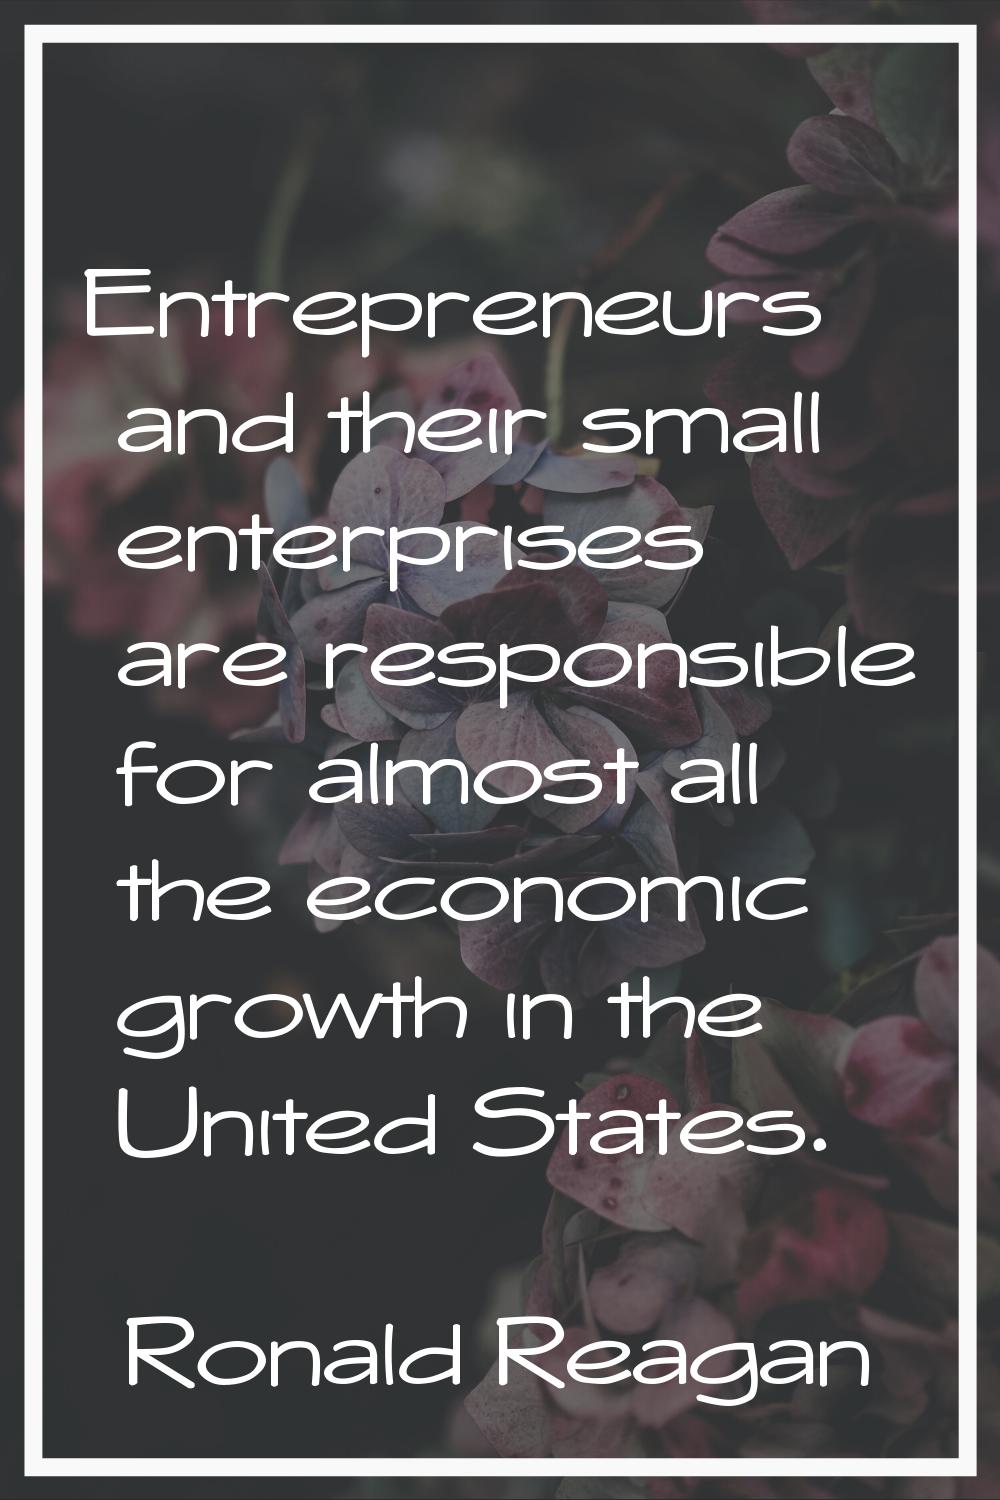 Entrepreneurs and their small enterprises are responsible for almost all the economic growth in the